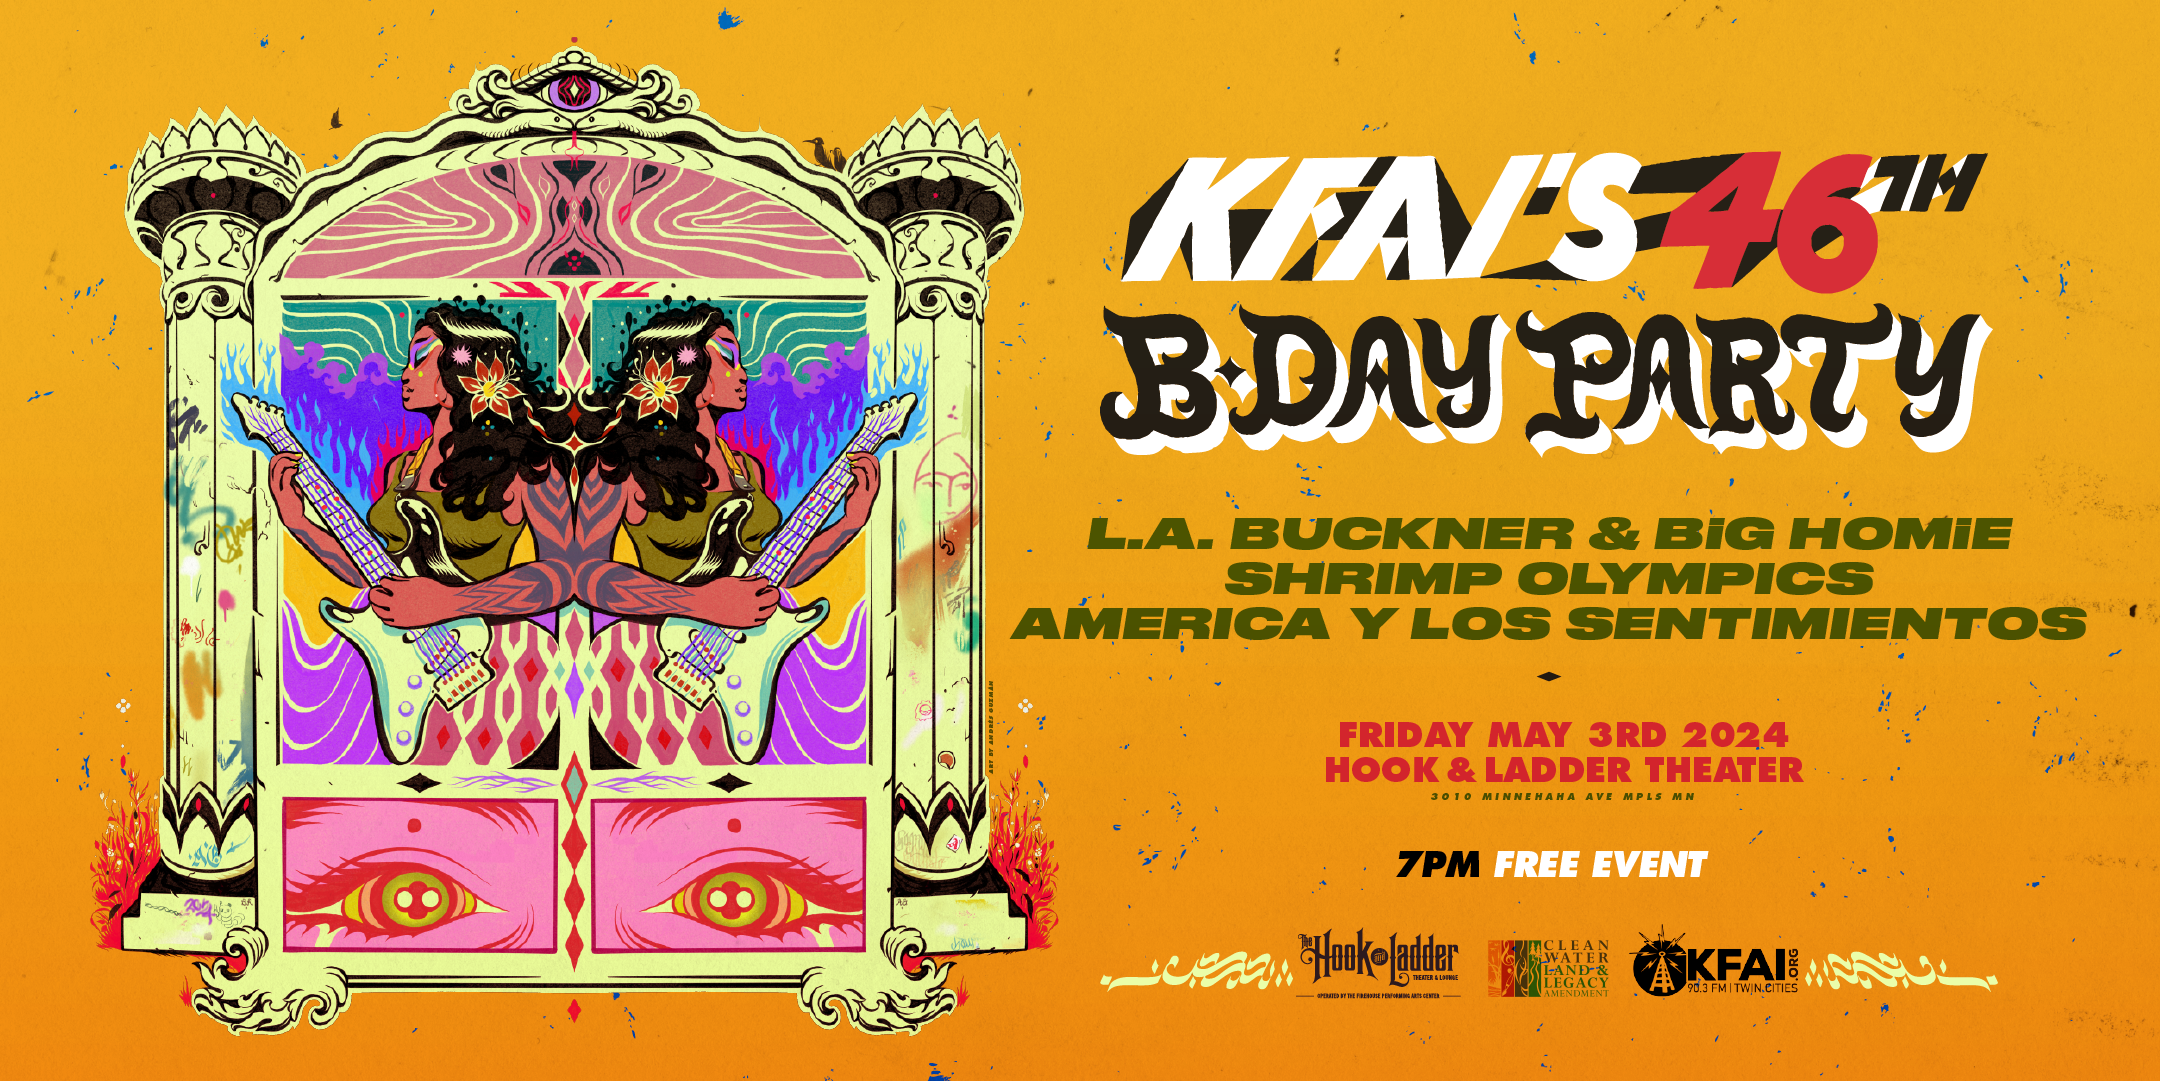 KFAI’s 46th Anniversary Community Celebration • L.A. Buckner and BiG HOMiE• • shrimp olympics • America y Los Sentimientos Friday, May 3, 2023 The Hook and Ladder Theater Doors 7:00pm :: Music 8:00pm :: 21+ FREE with Registration